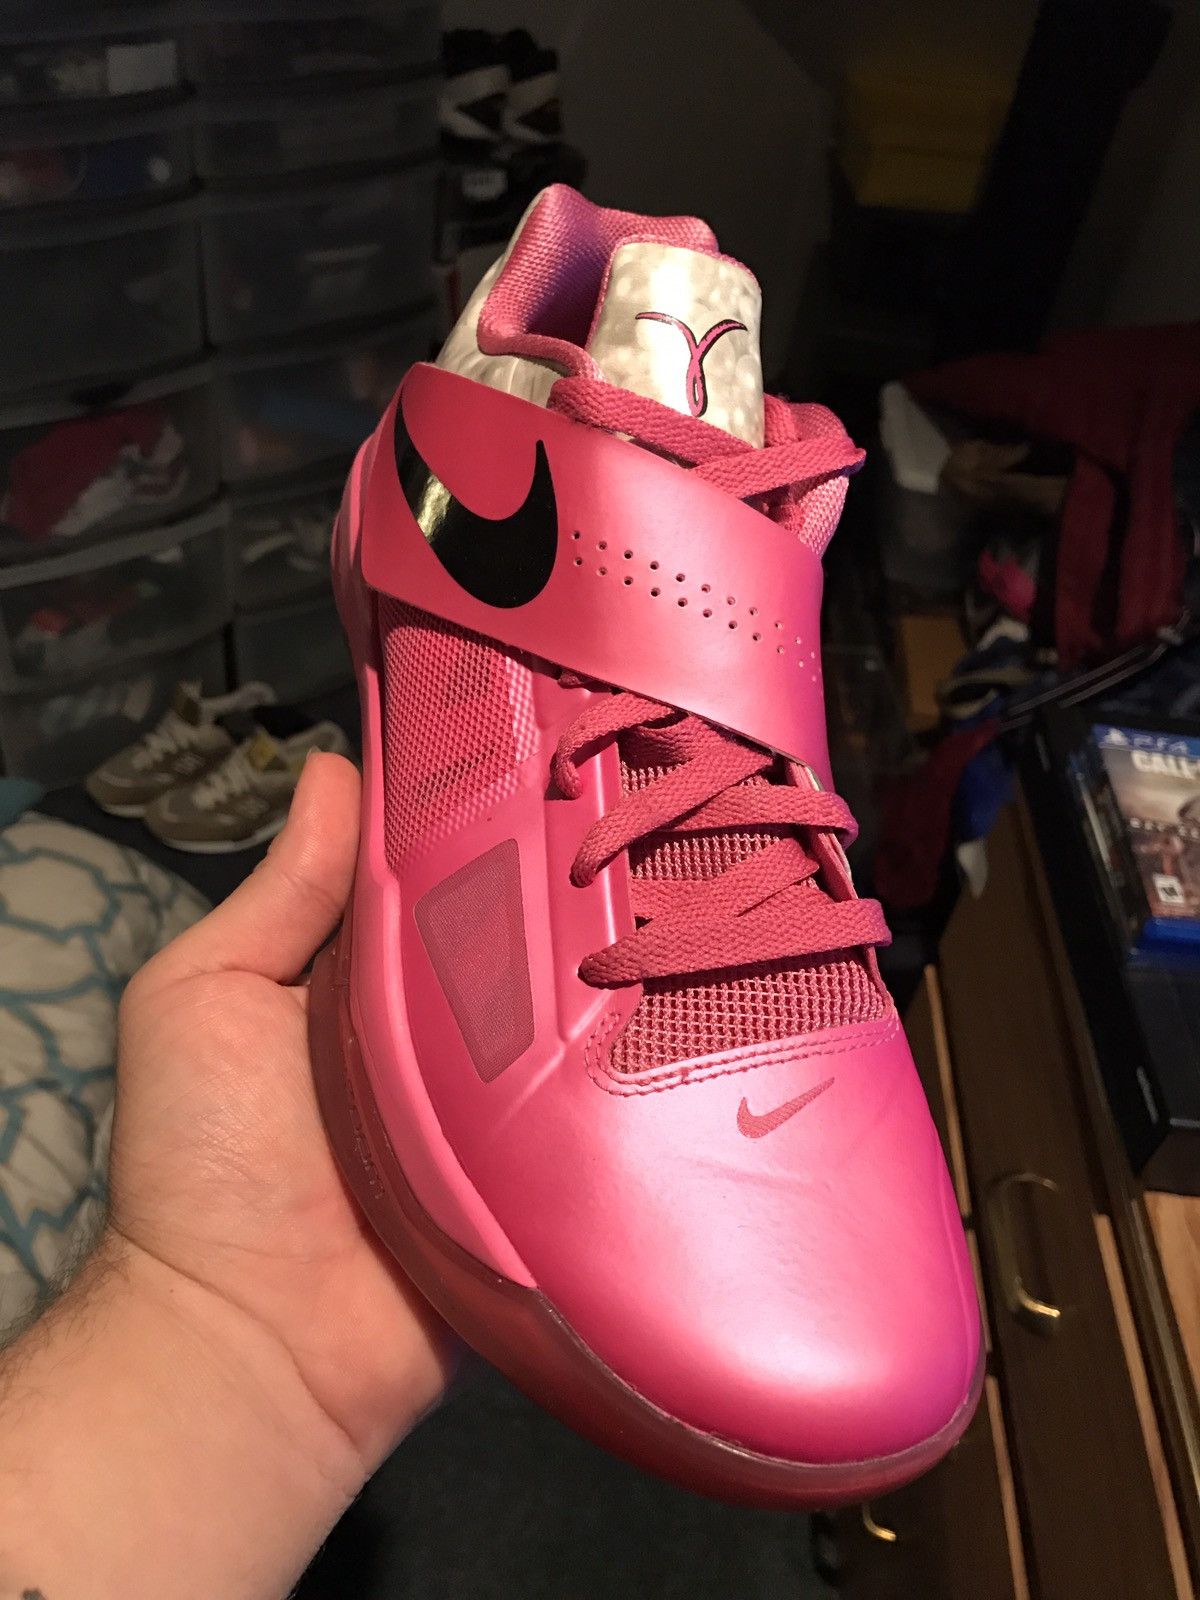 Nike Aunt Pearl Kd4s Size US 10 / EU 43 - 3 Preview